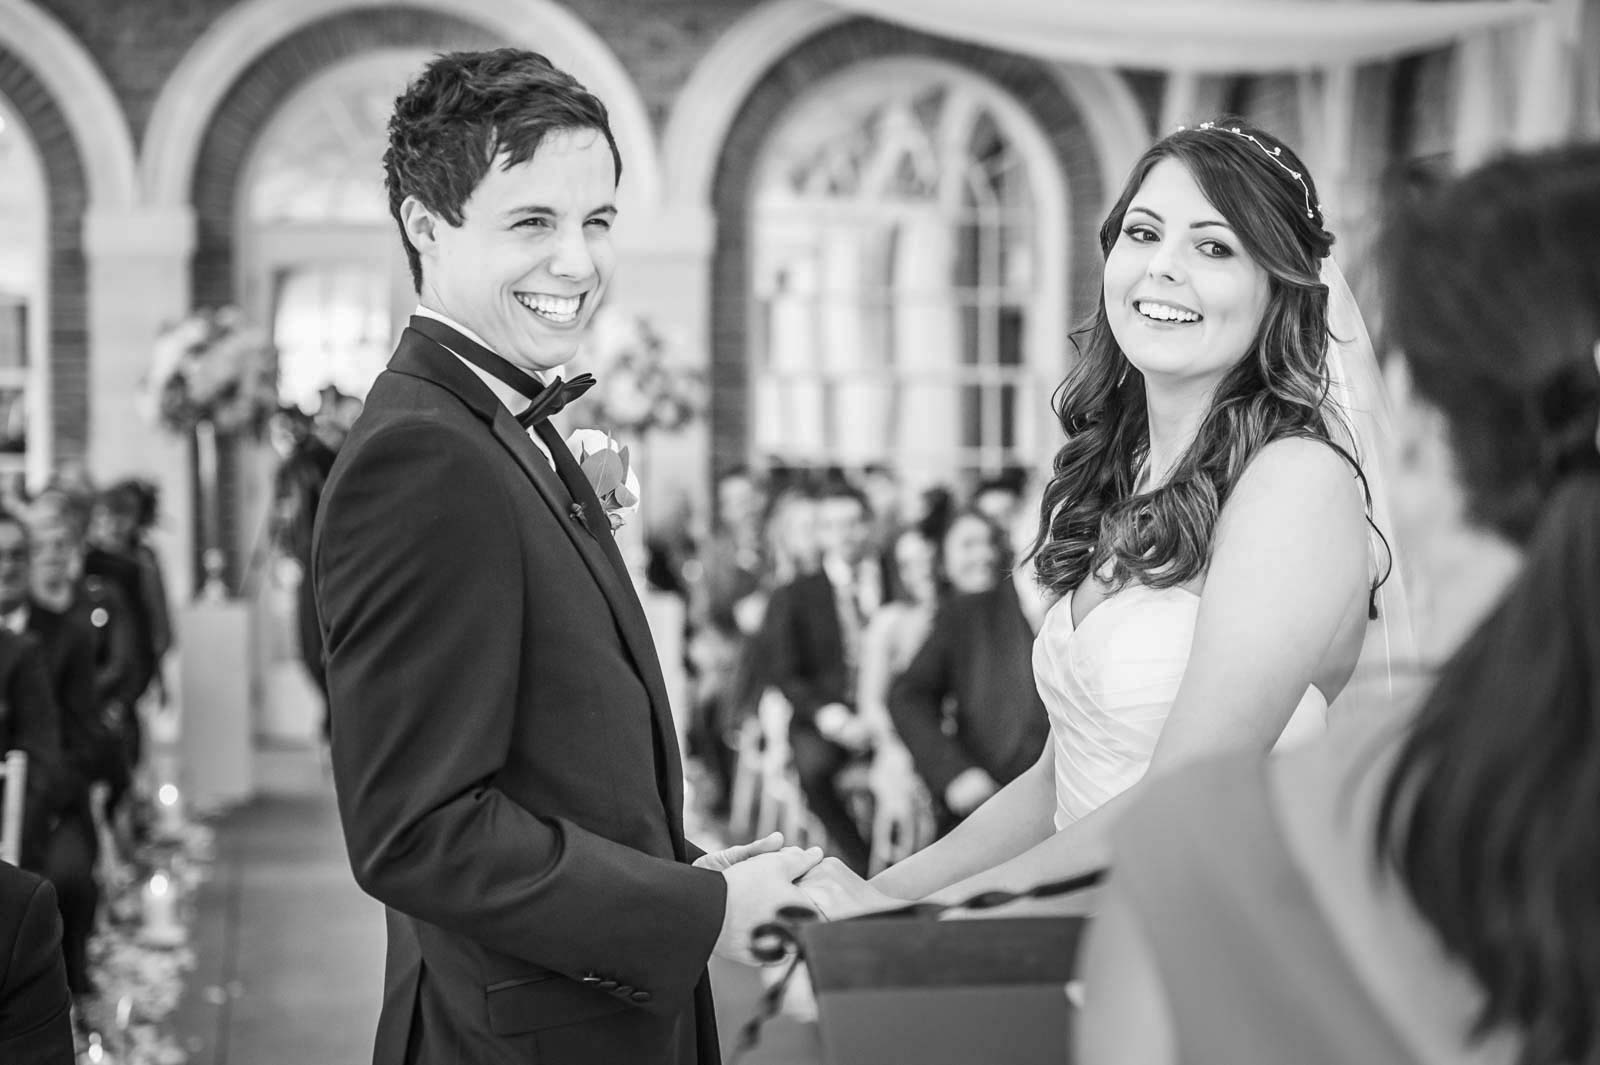 The beaming couple during the wedding ceremony at Great Fosters Hotel